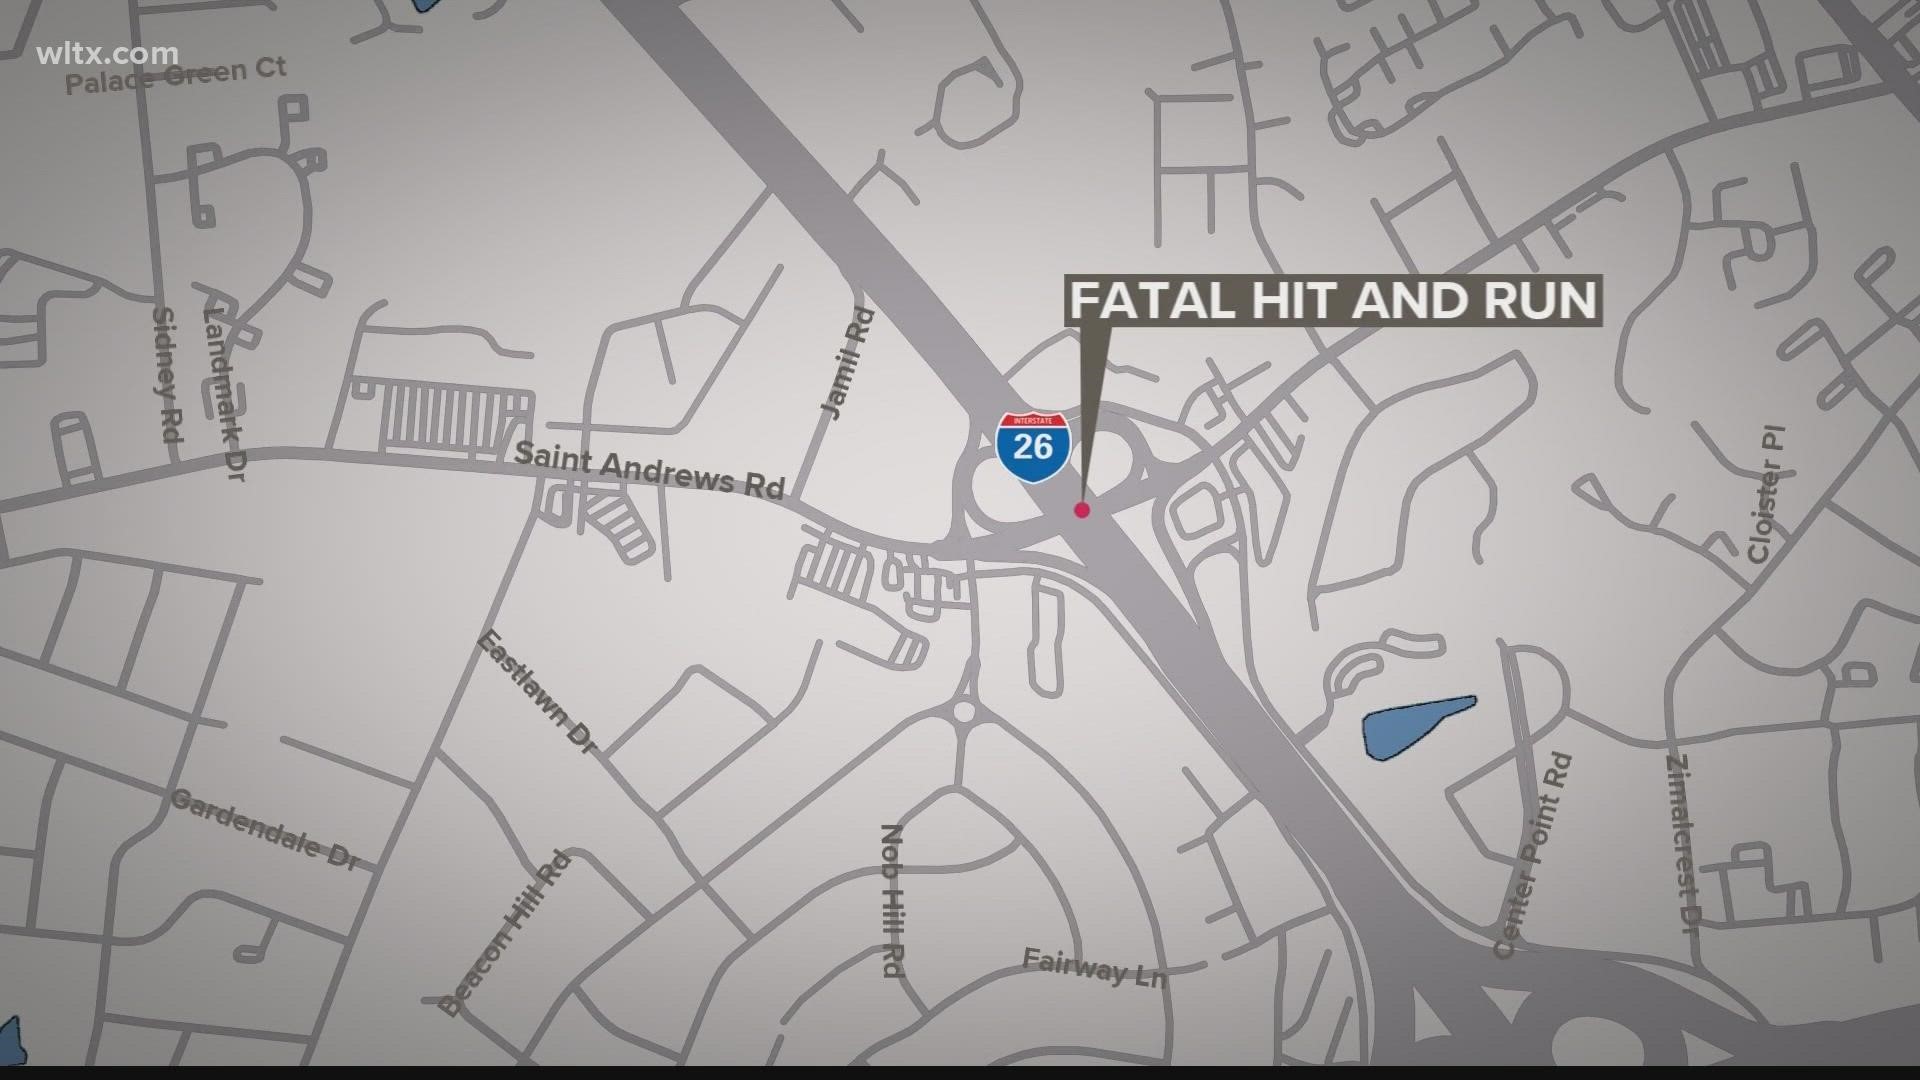 Troopers with the South Carolina Highway Patrol say they need your help to find who hit and killed someone on I-26 Monday night.